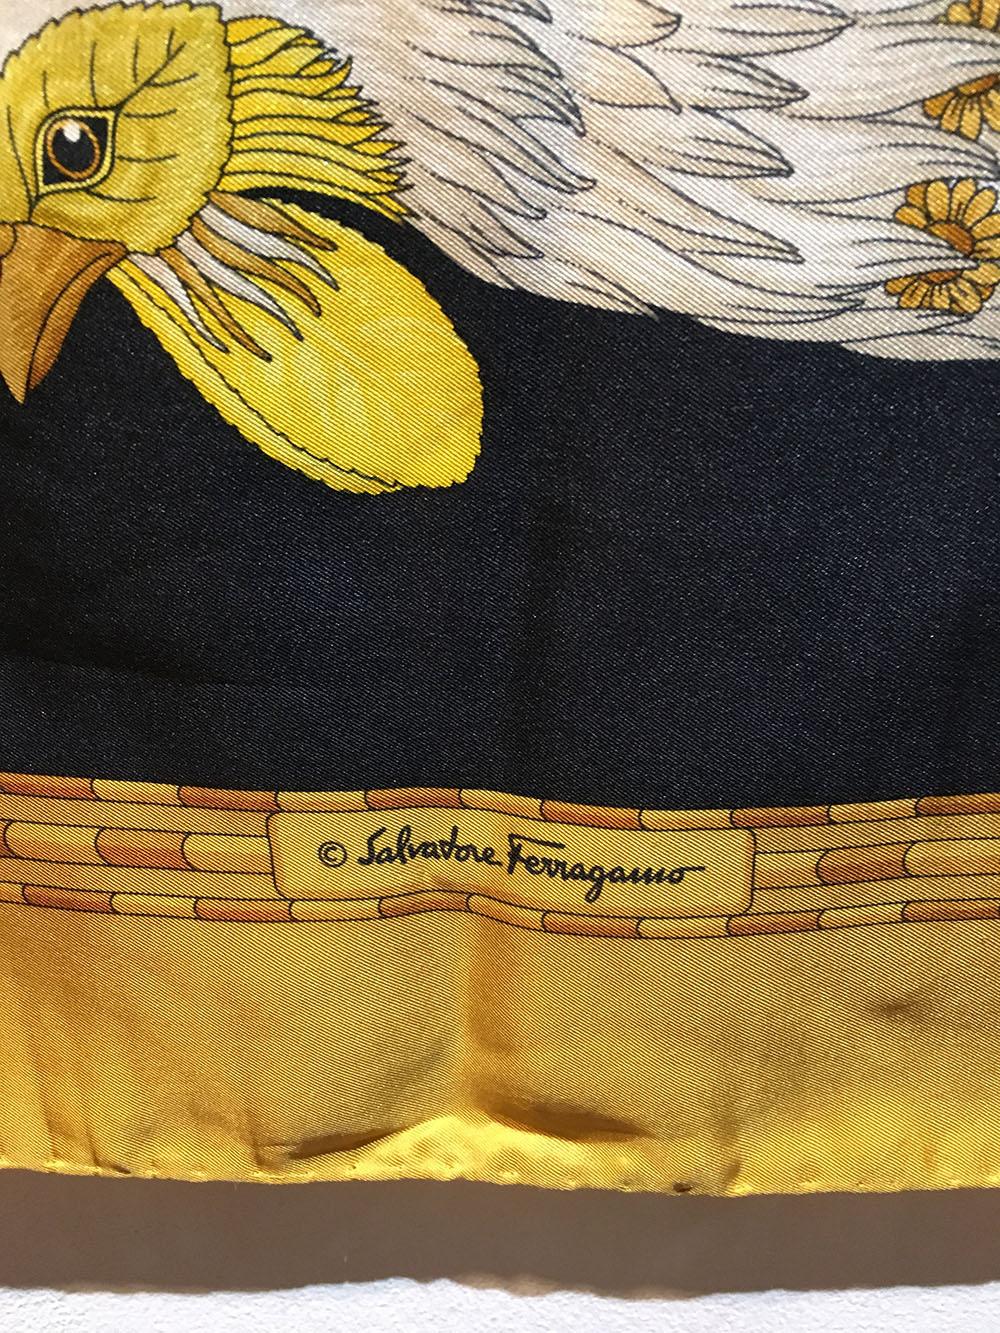 STUNNING Salvatore Ferragamo Vintage Black and Gold Rooster Chicken Print Silk Scarf in excellent condition.  Gorgeous artistic rendition of 2 rooster chickens with cream bodies and golden feathers outlined in black, over a black background